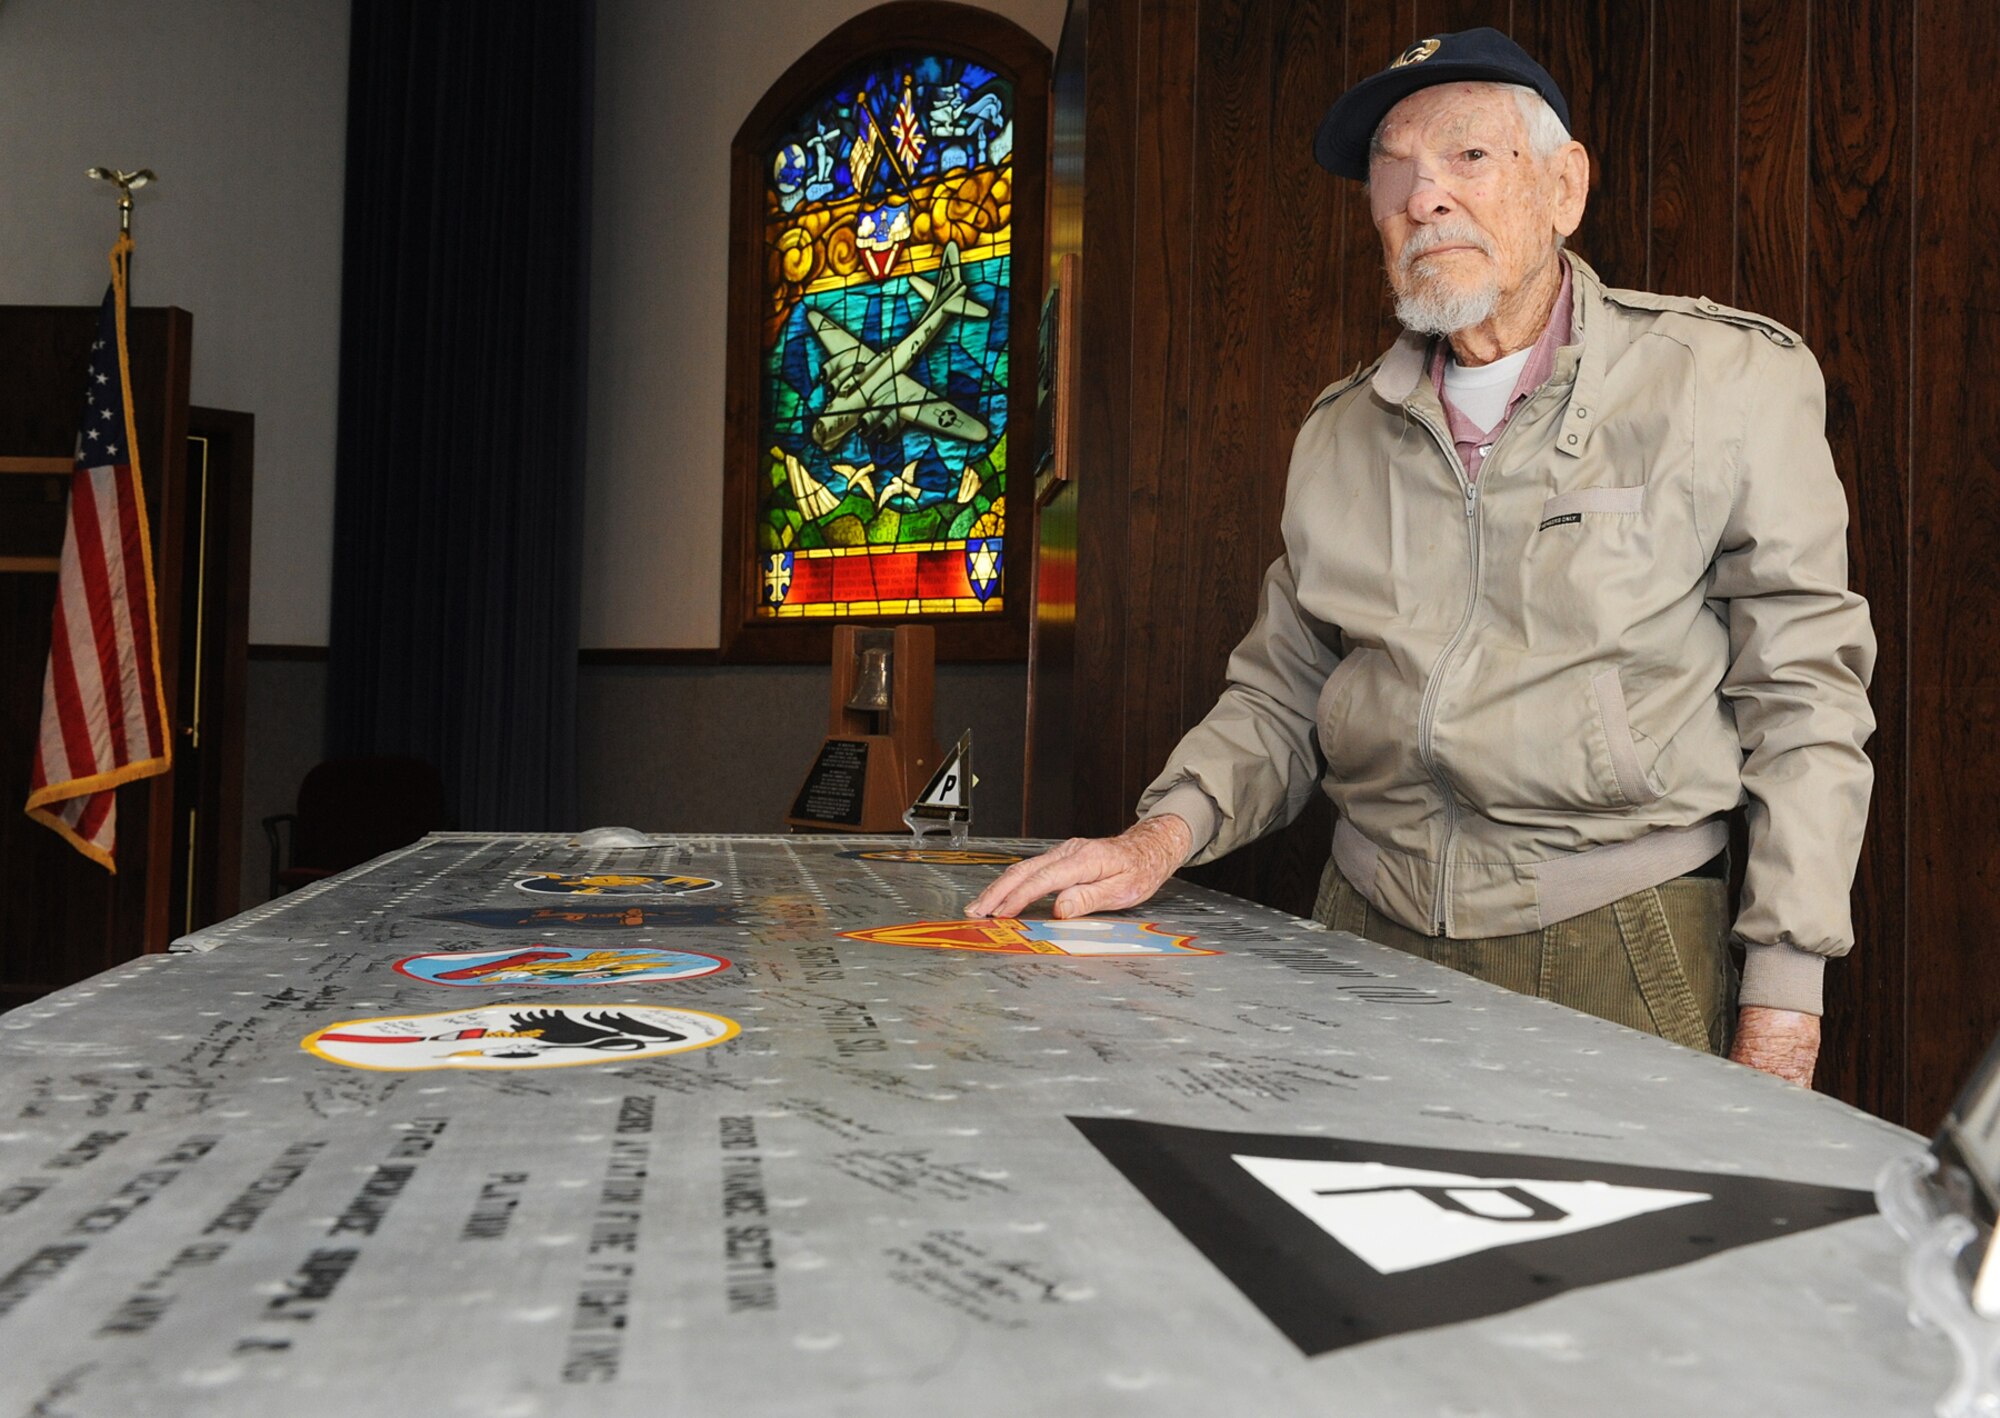 Olen Grant, 91, stands next to the wing panel of an old B-17 bomber that his unit, the 384th Bomber Group, flew during World War II. The 384th Bomber Group Inc., the official veteran’s association for the 384th, owns the panel and is shipping it around the country in an attempt to get signatures from the unit’s surviving members. (U.S. Air Force photo by Alex Lloyd)